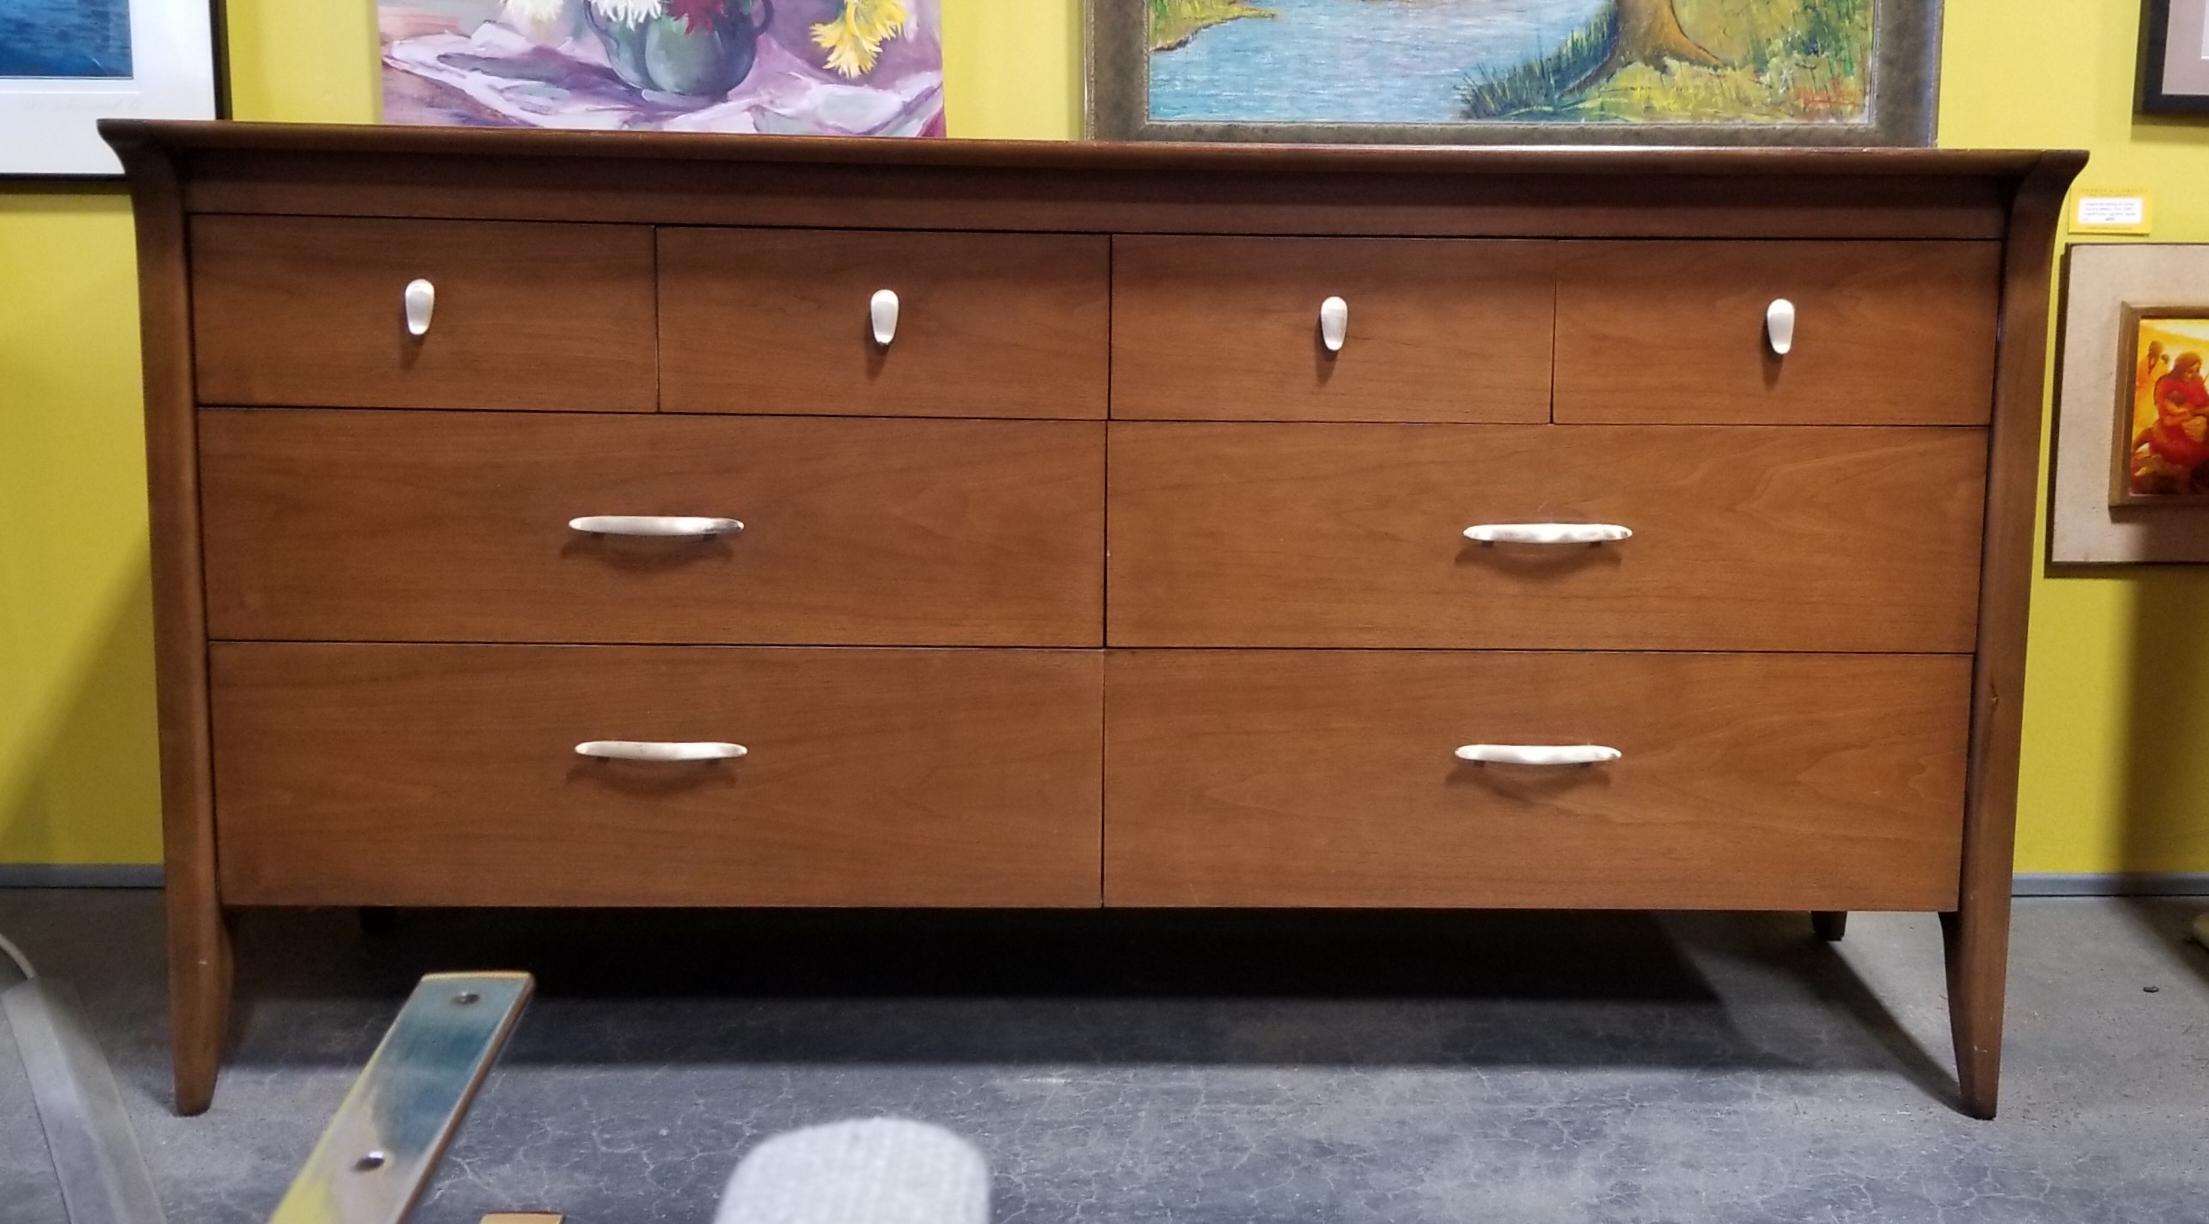 Quality craftsmanship and materials in this Mid-Century Modern low dresser designed by John Van Koert for Drexel Furniture. Ample storage featuring 8 drawers. All wood construction solid oak secondary woods and dovetail detail. Very good original